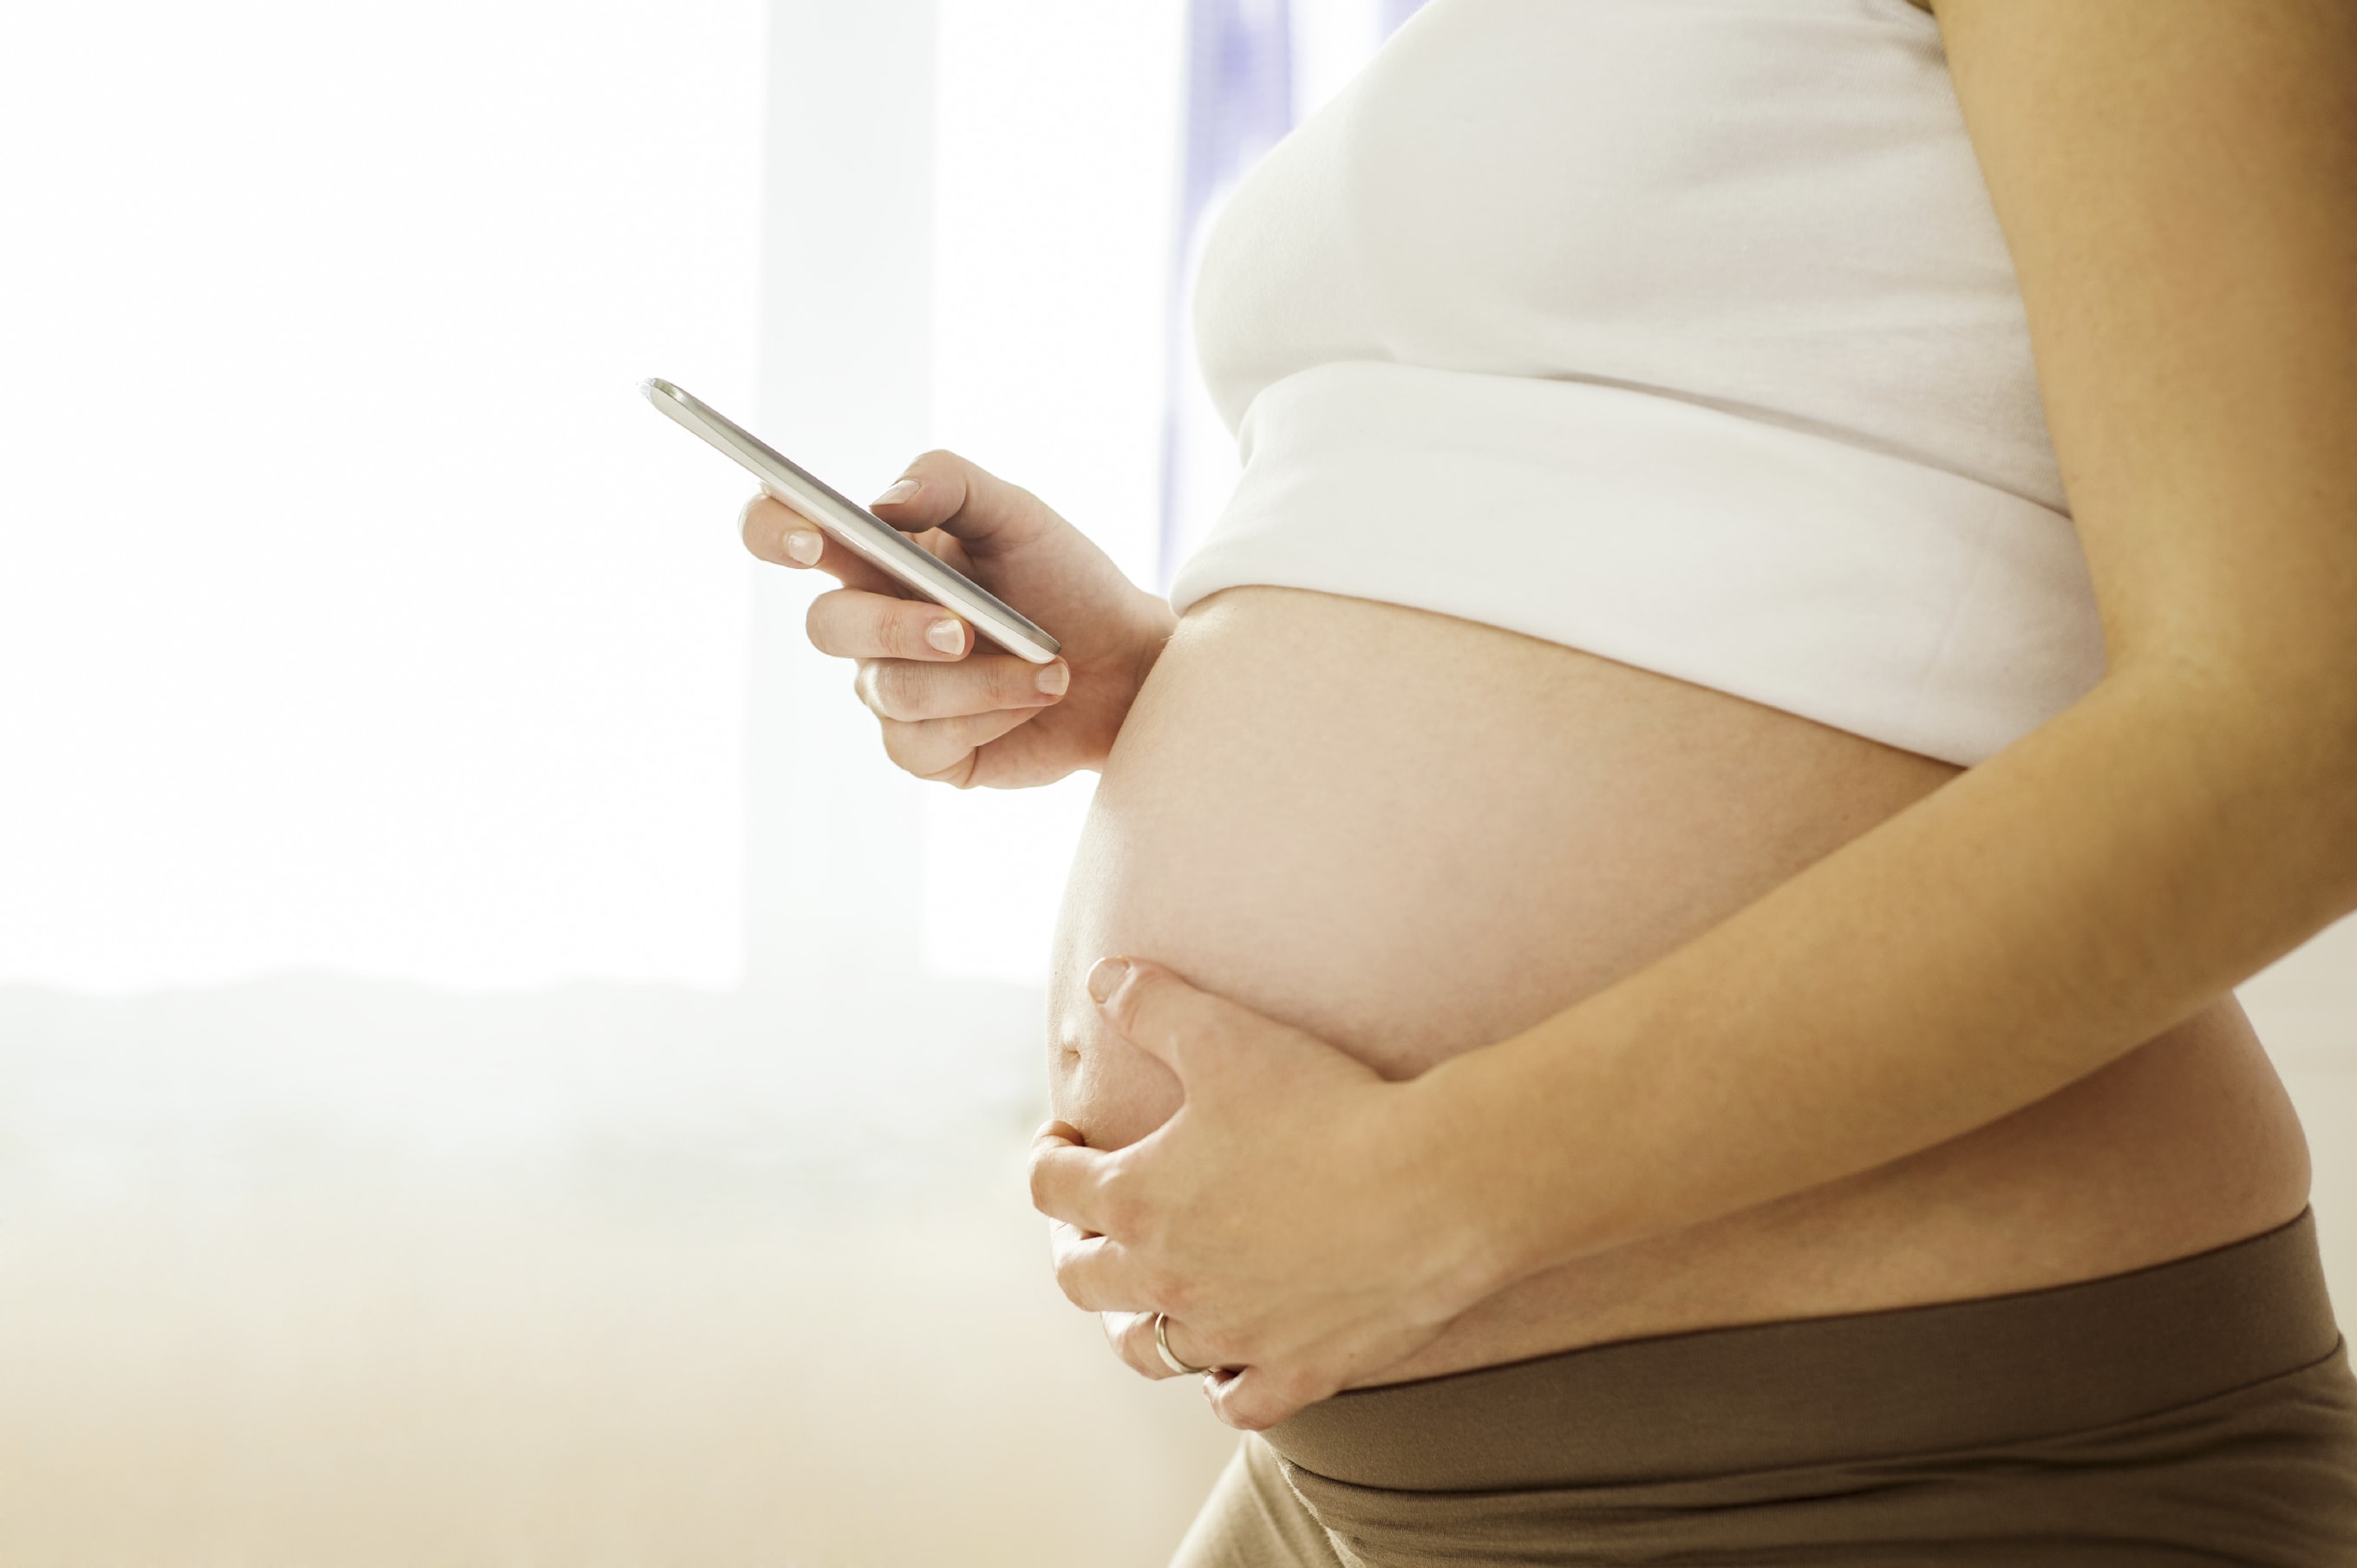 Plan and prepare for the arrival of your baby with these apps